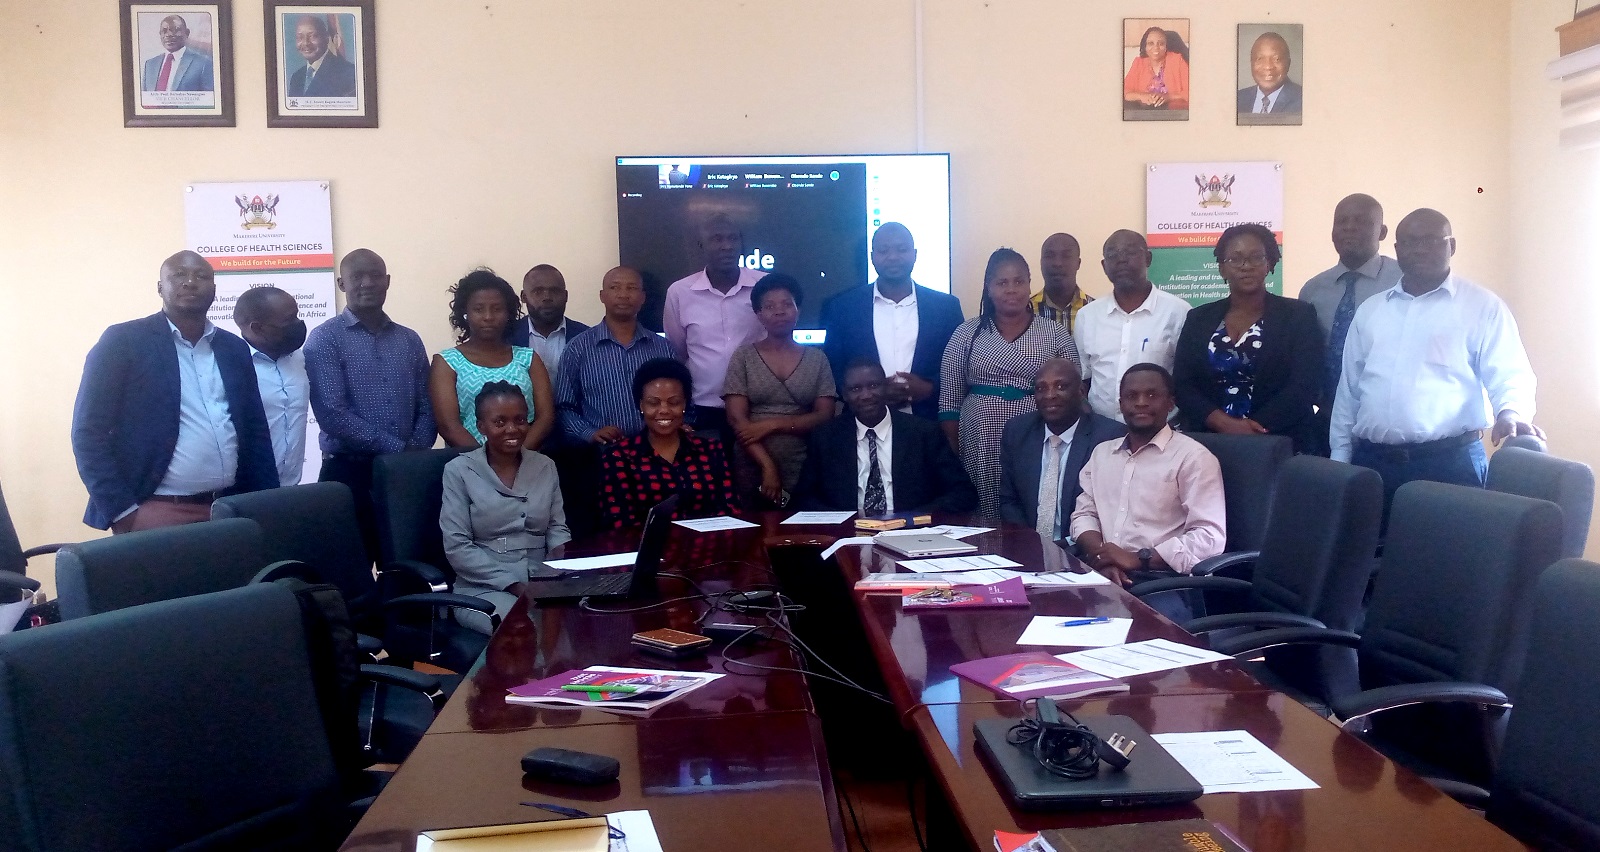 The Lead facilitators: Director, Quality Assurance-Dr. Cyprian Misinde (Seated Centre), Dean, School of Health Sciences-Dr. Pakoyo F. Kamba (Seated 2nd Right), Irene Namatende (Standing 6th Right) together with the Members of the Quality Assurance and Gender Committee, plus other members of staff at the College of Health Sciences, Makerere University on 19th June 2023. Mulago Hill, Kampala Uganda.